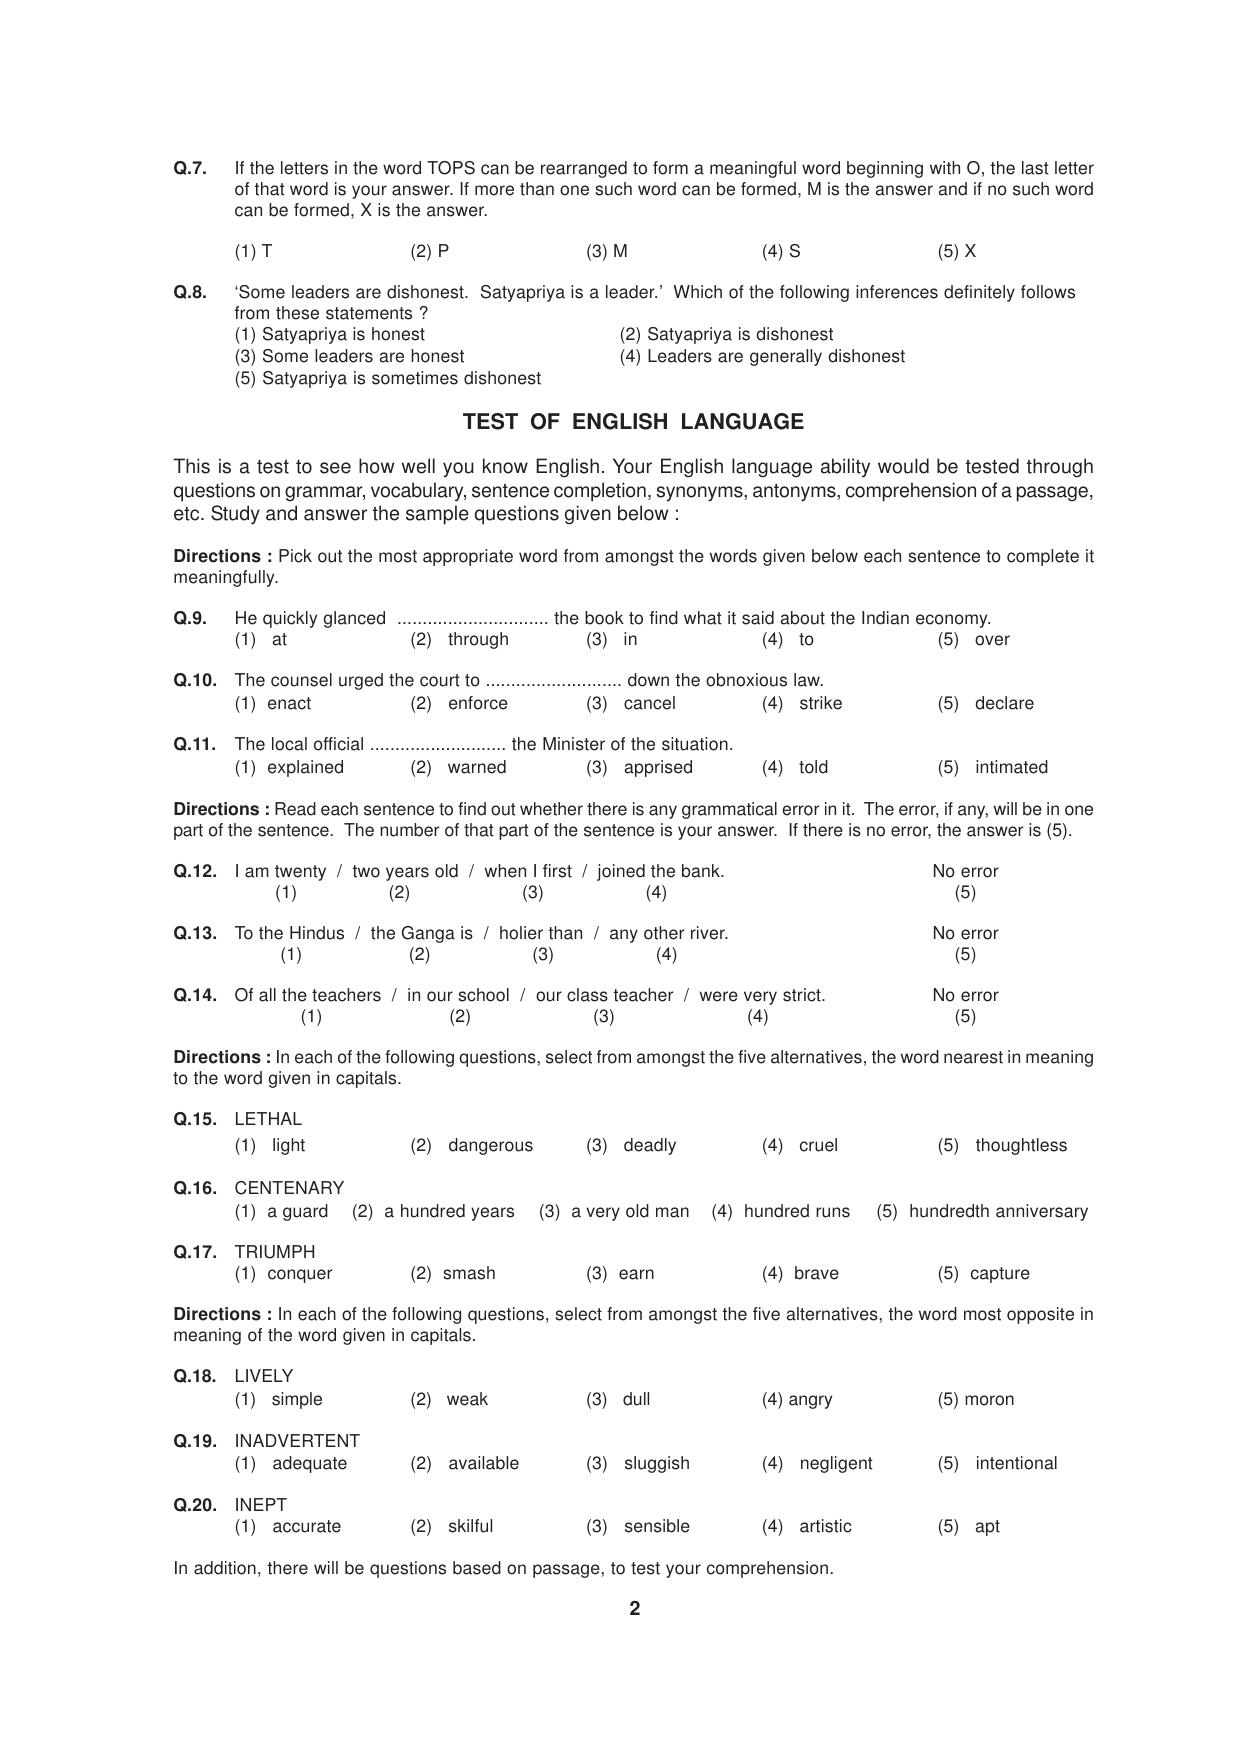 SEBI Officer Sample Question Paper Part 2 - Page 2